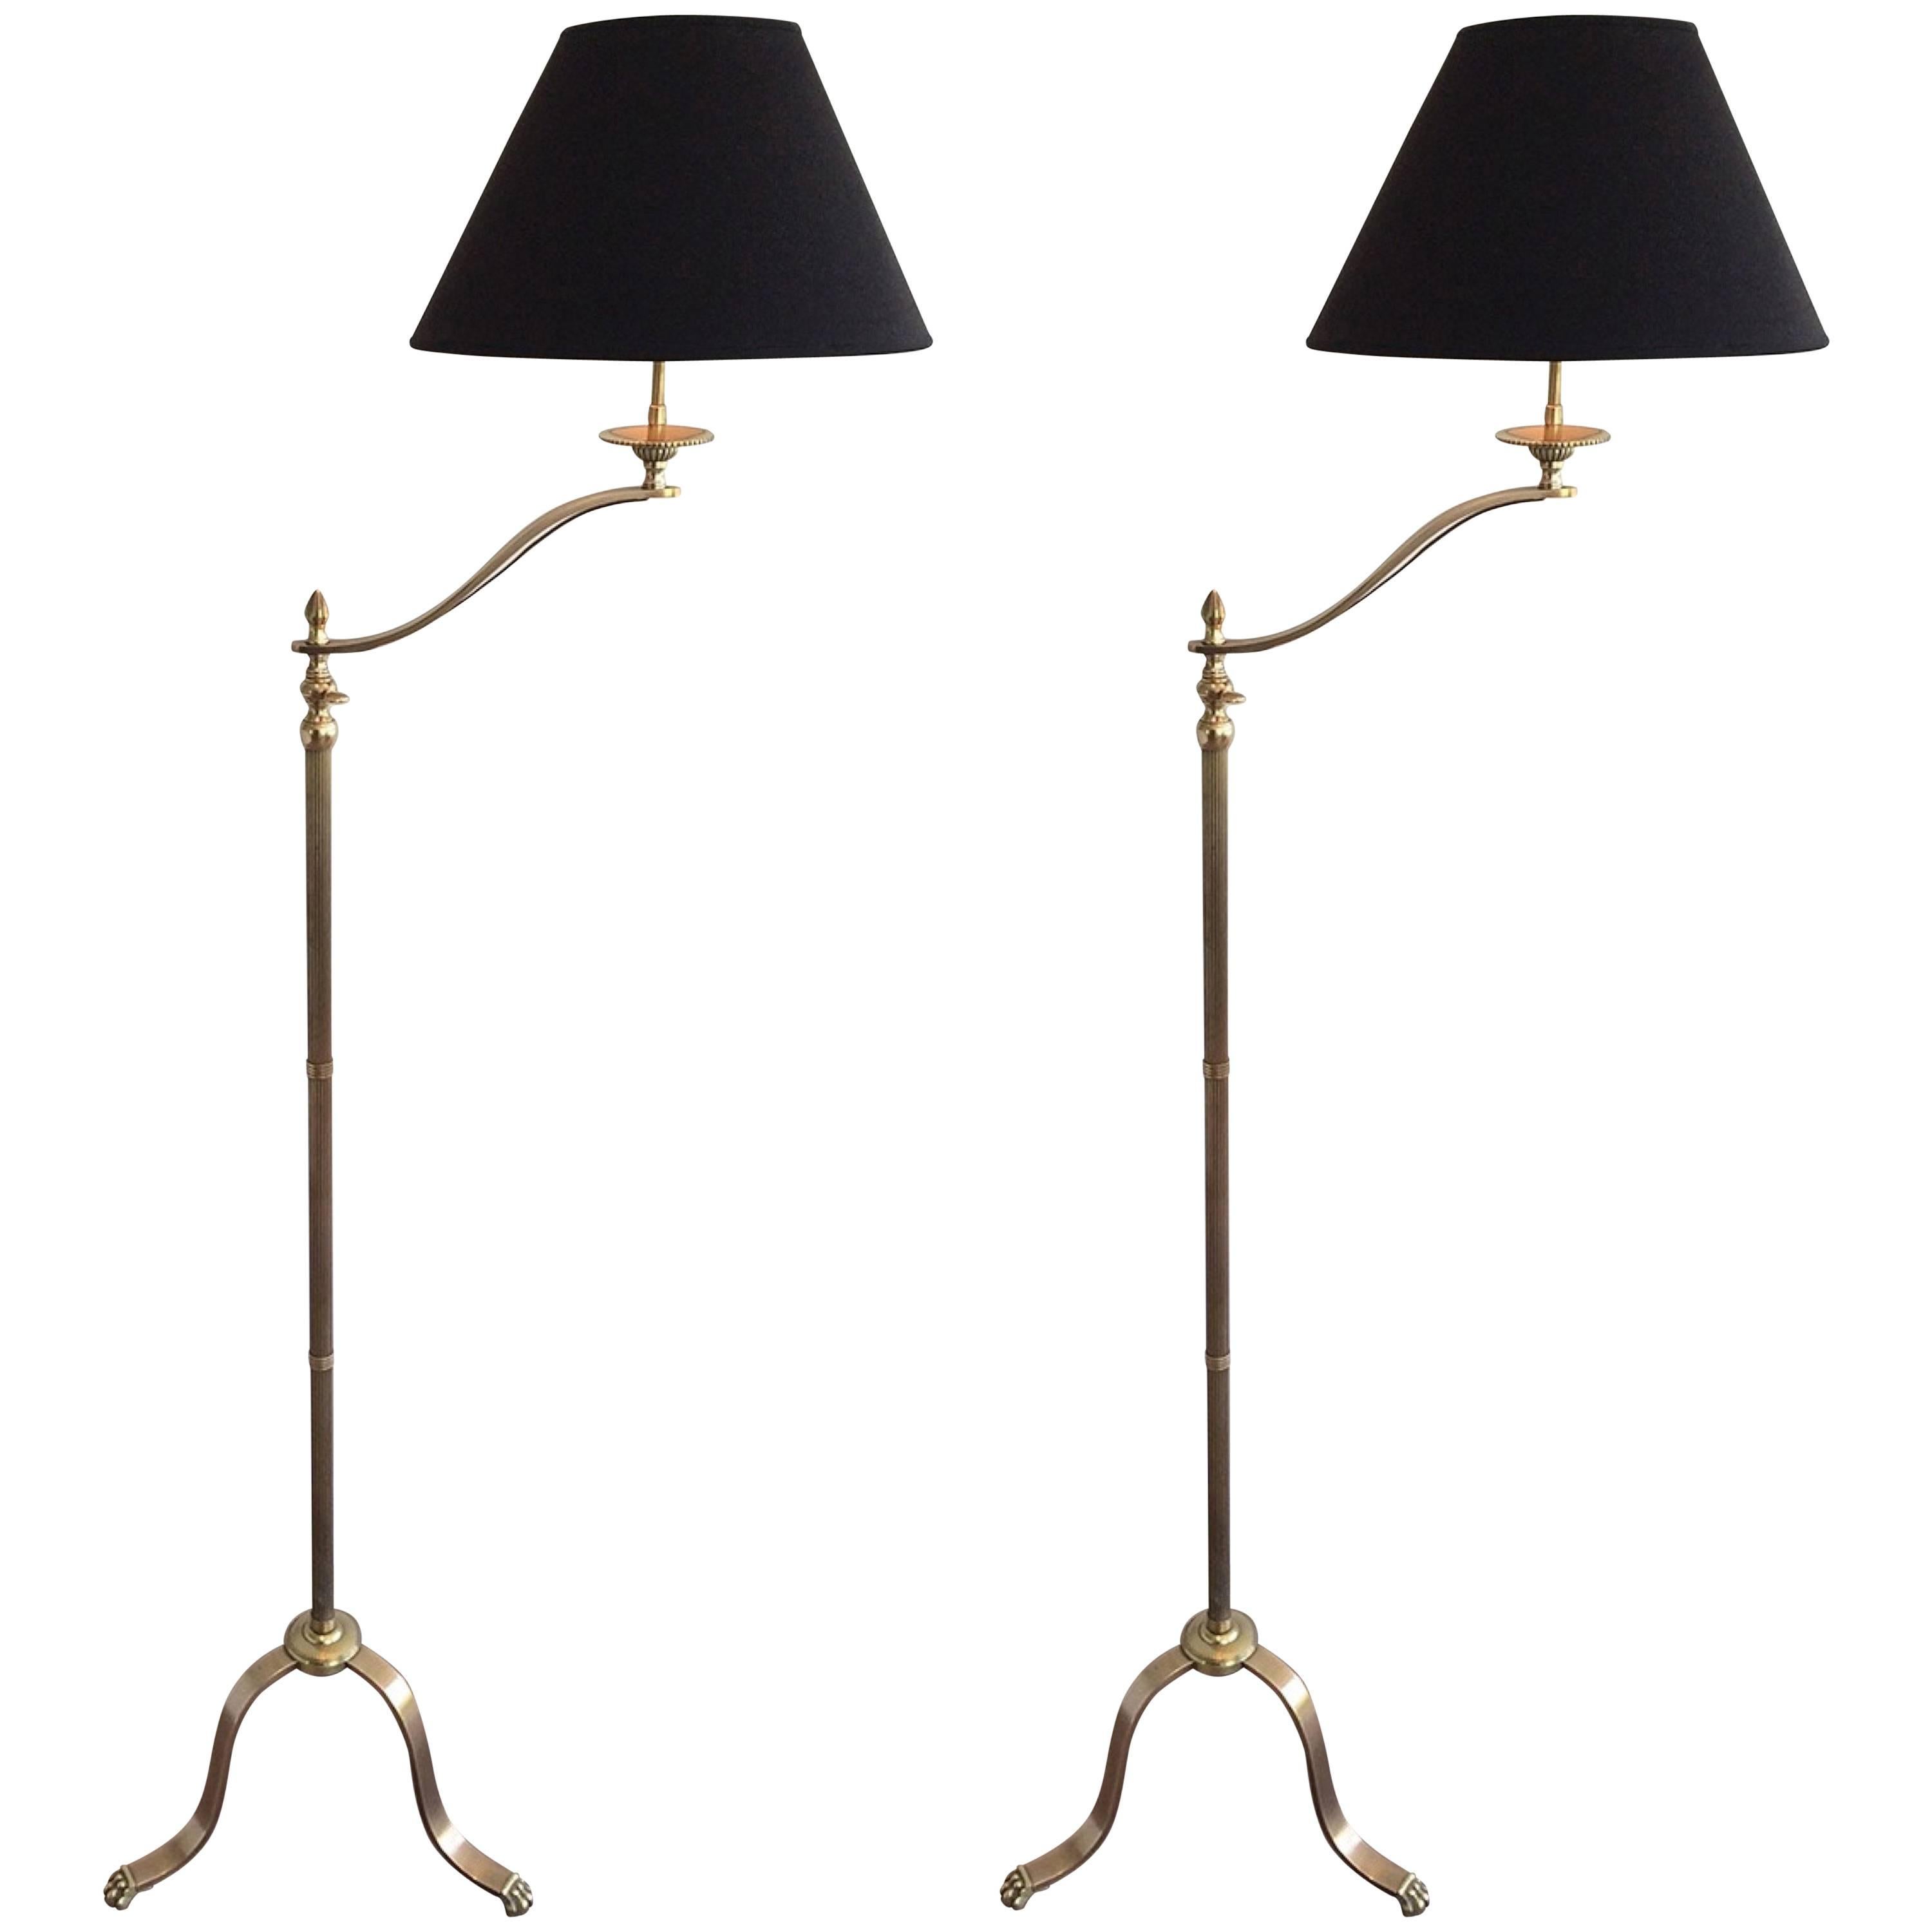 Pair of French Neoclassical Adjustable Reading Floor Lamps by Maison Jansen